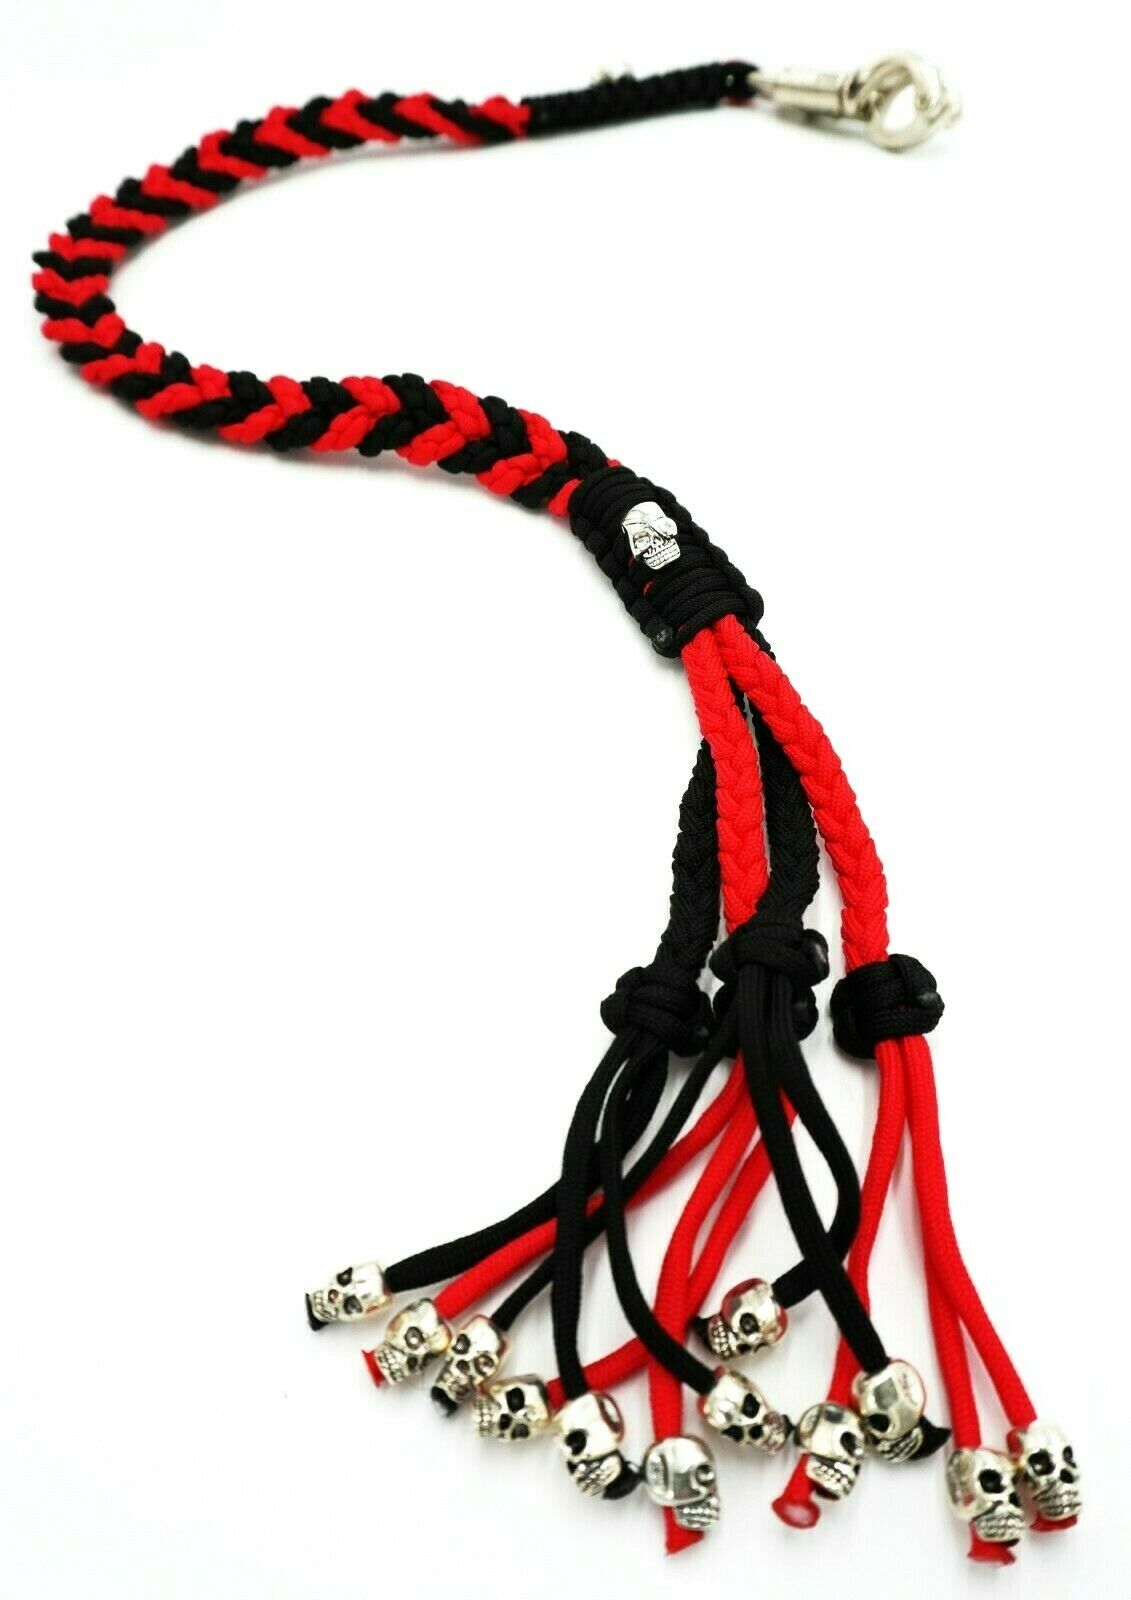 Short Paracord Get Back Whip Motorcycle Biker 17” Red Yellow GBW *Decoration